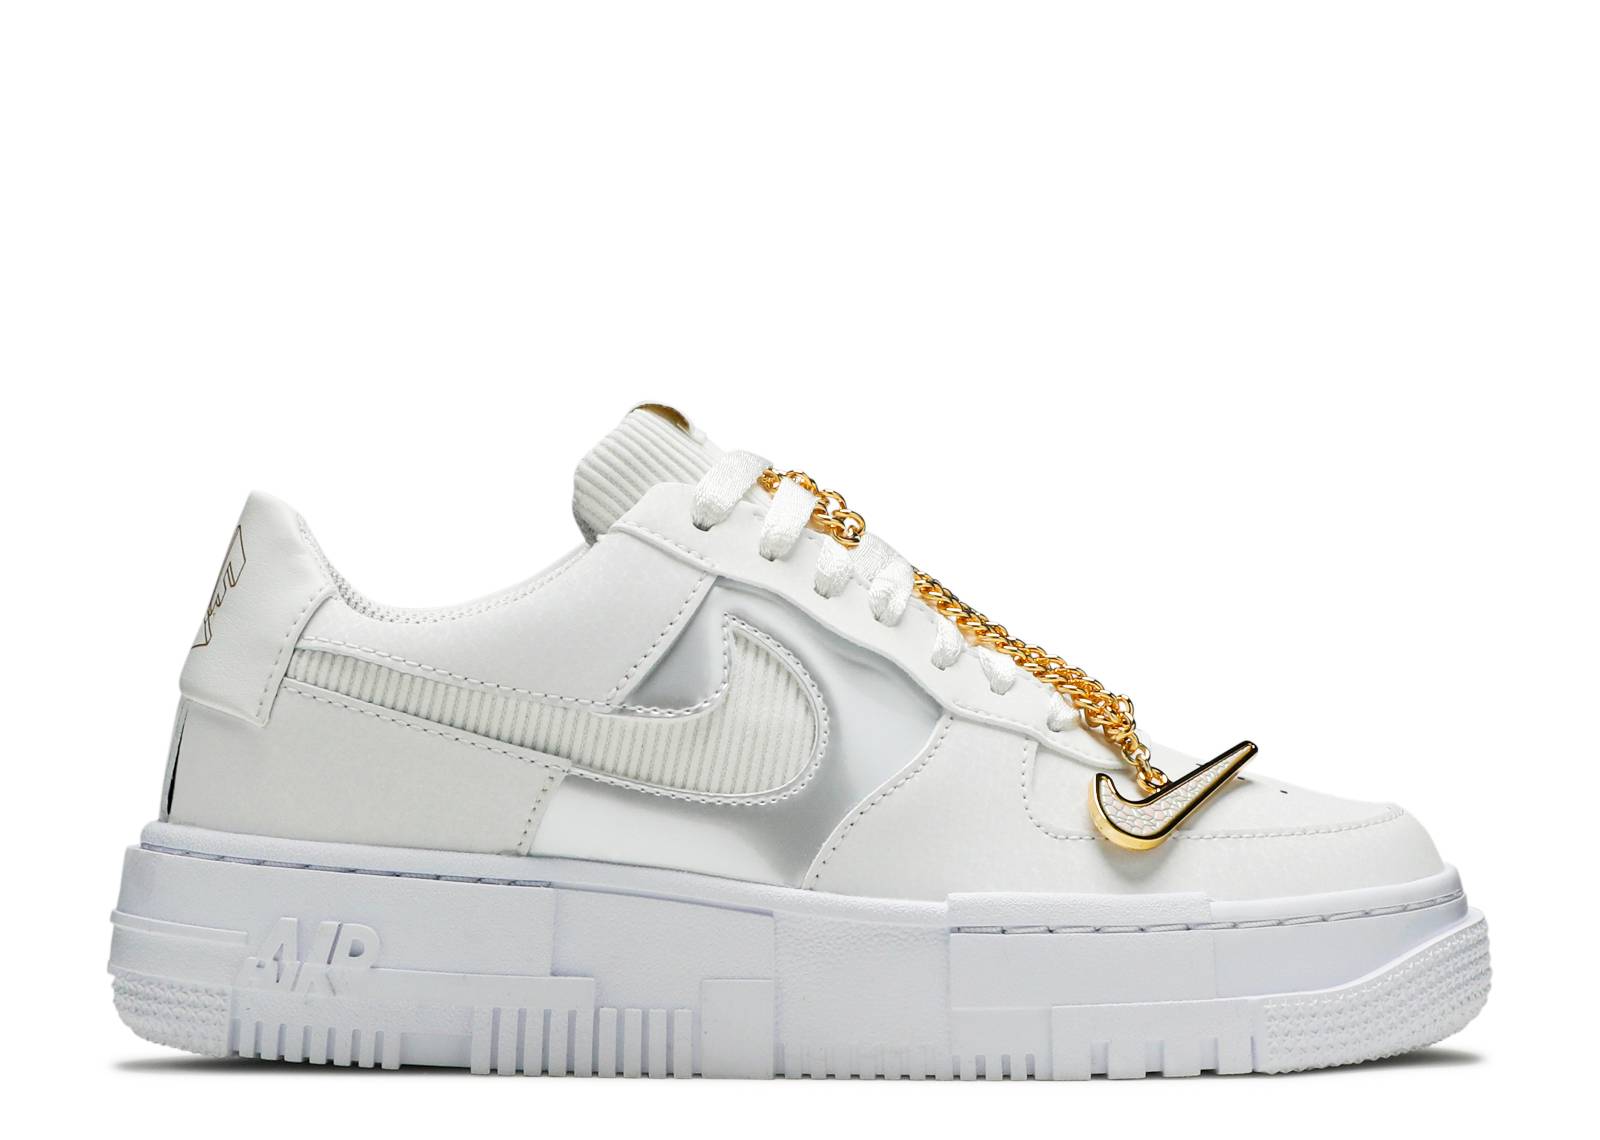 Wmns Air Force 1 Pixel 'Grey Gold Chain'